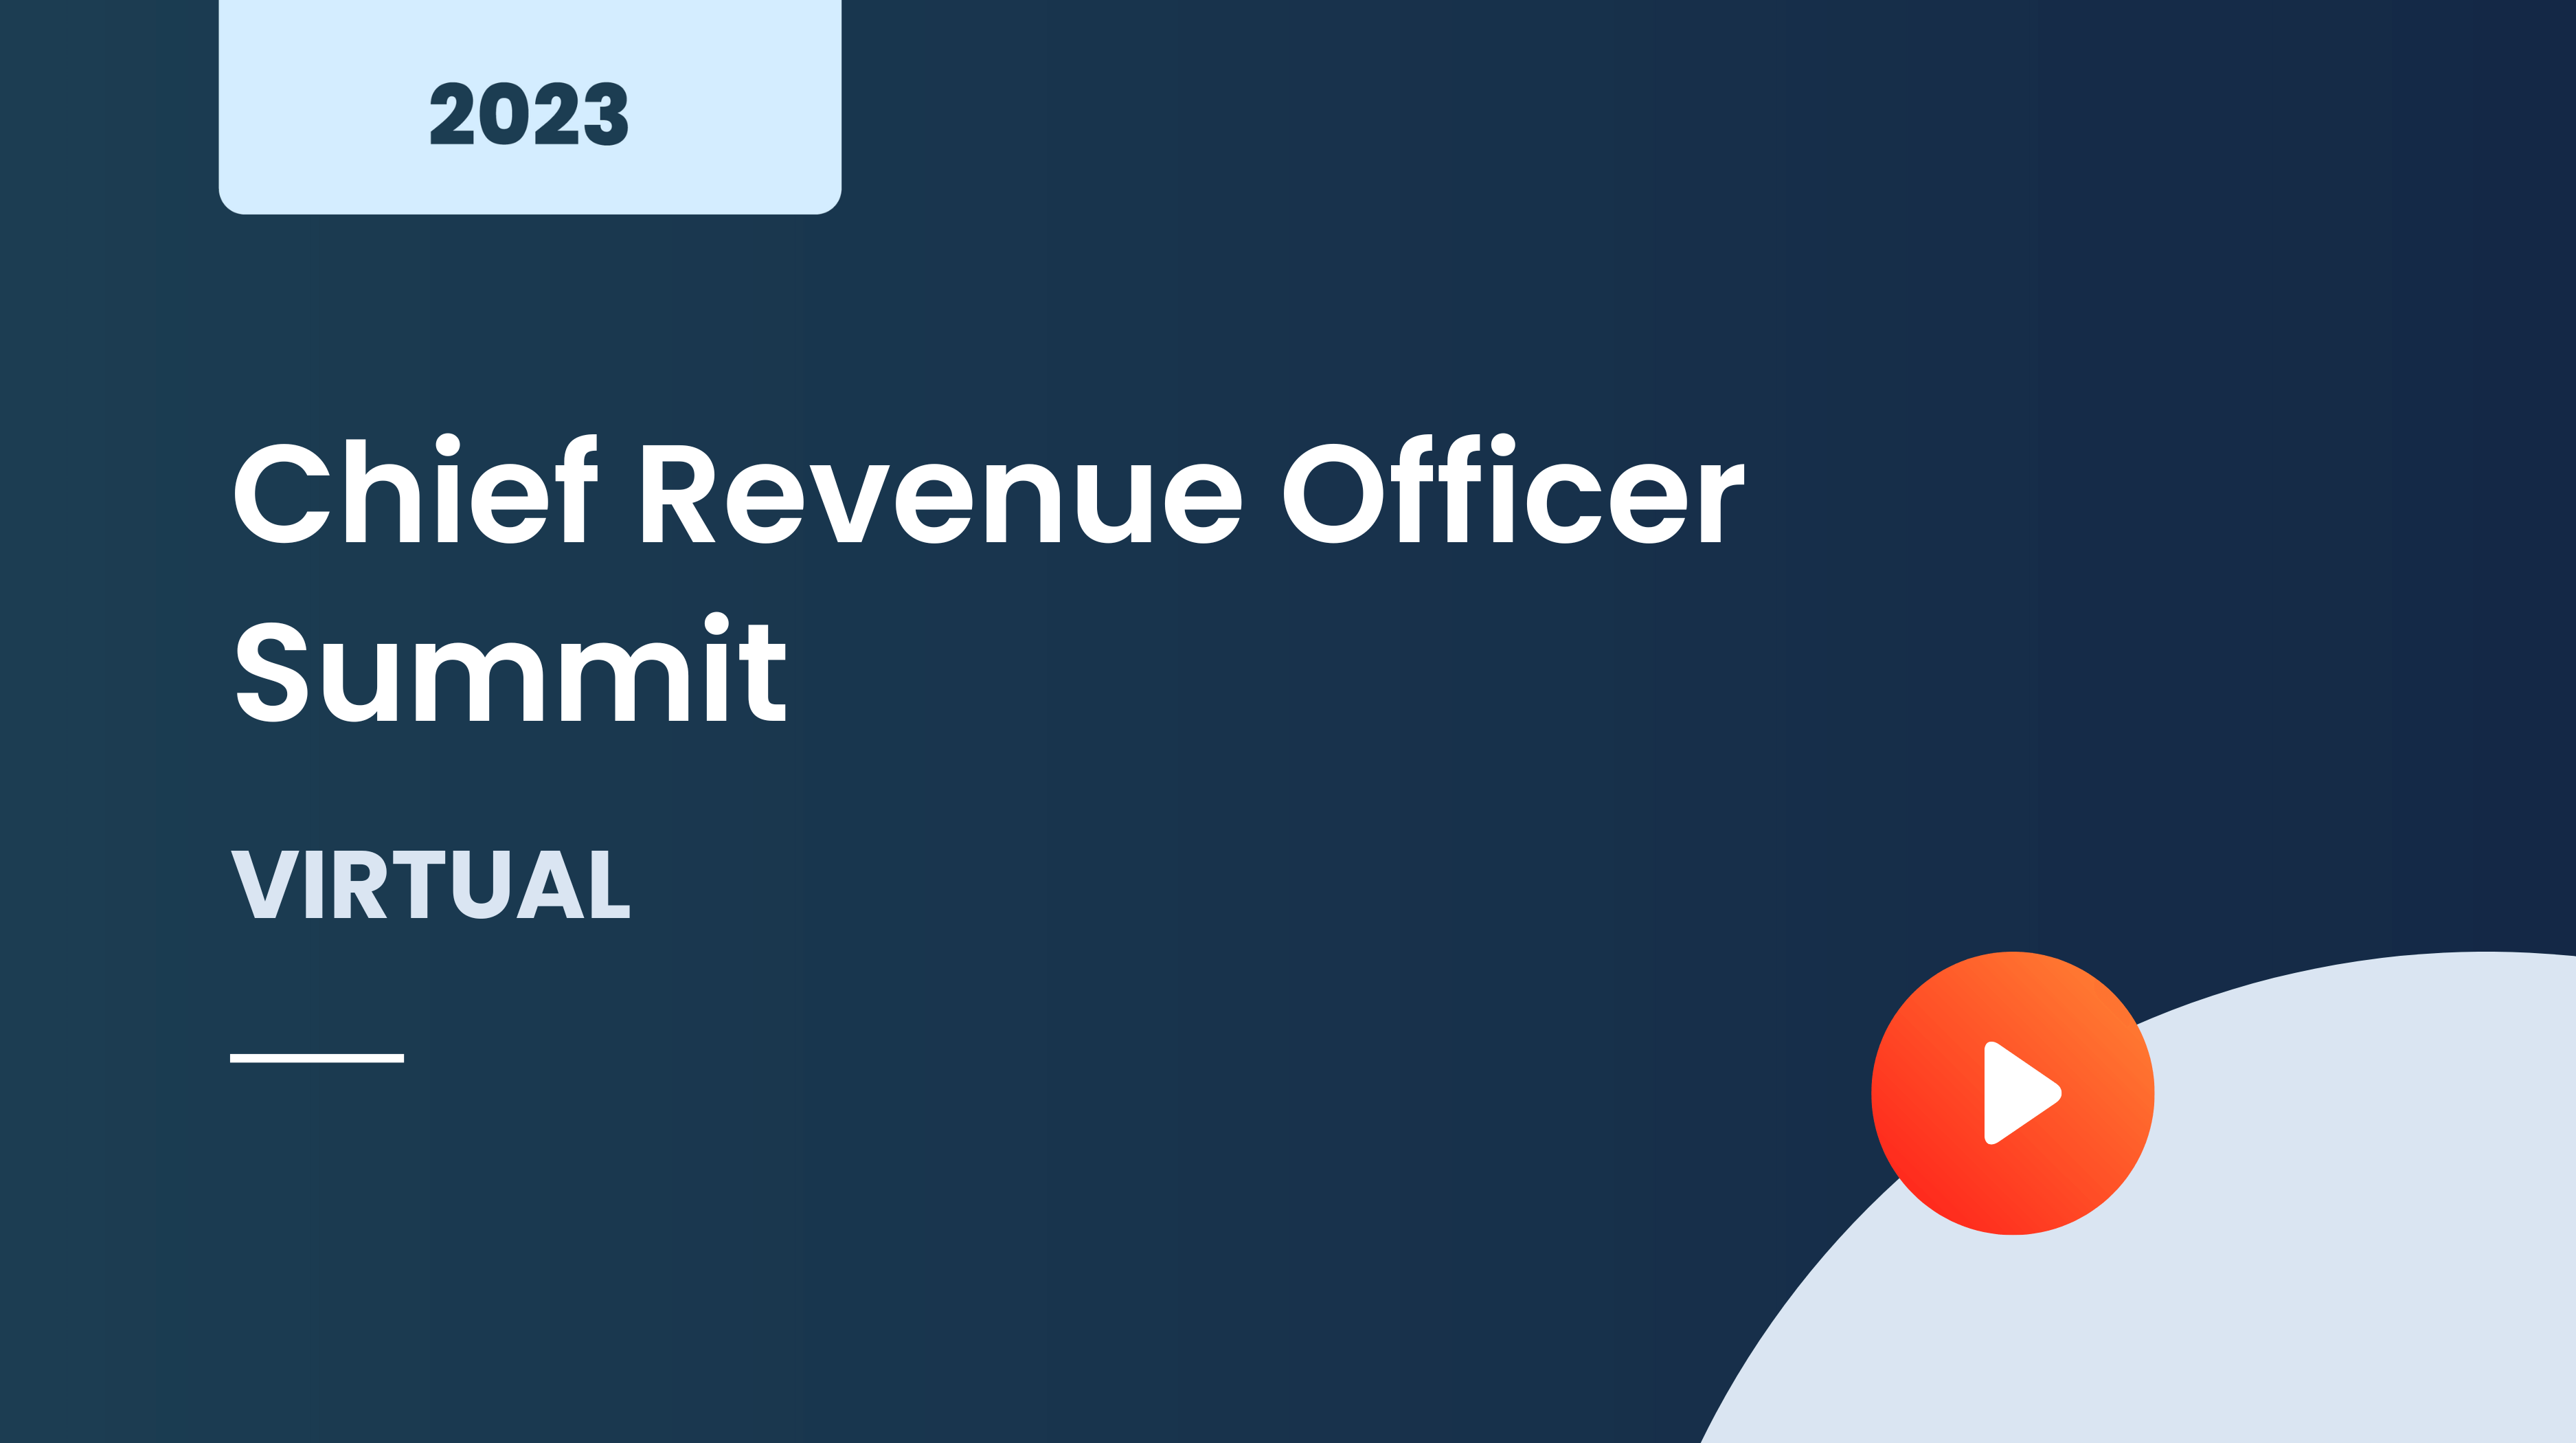 Chief Revenue Officer Summit February 2023